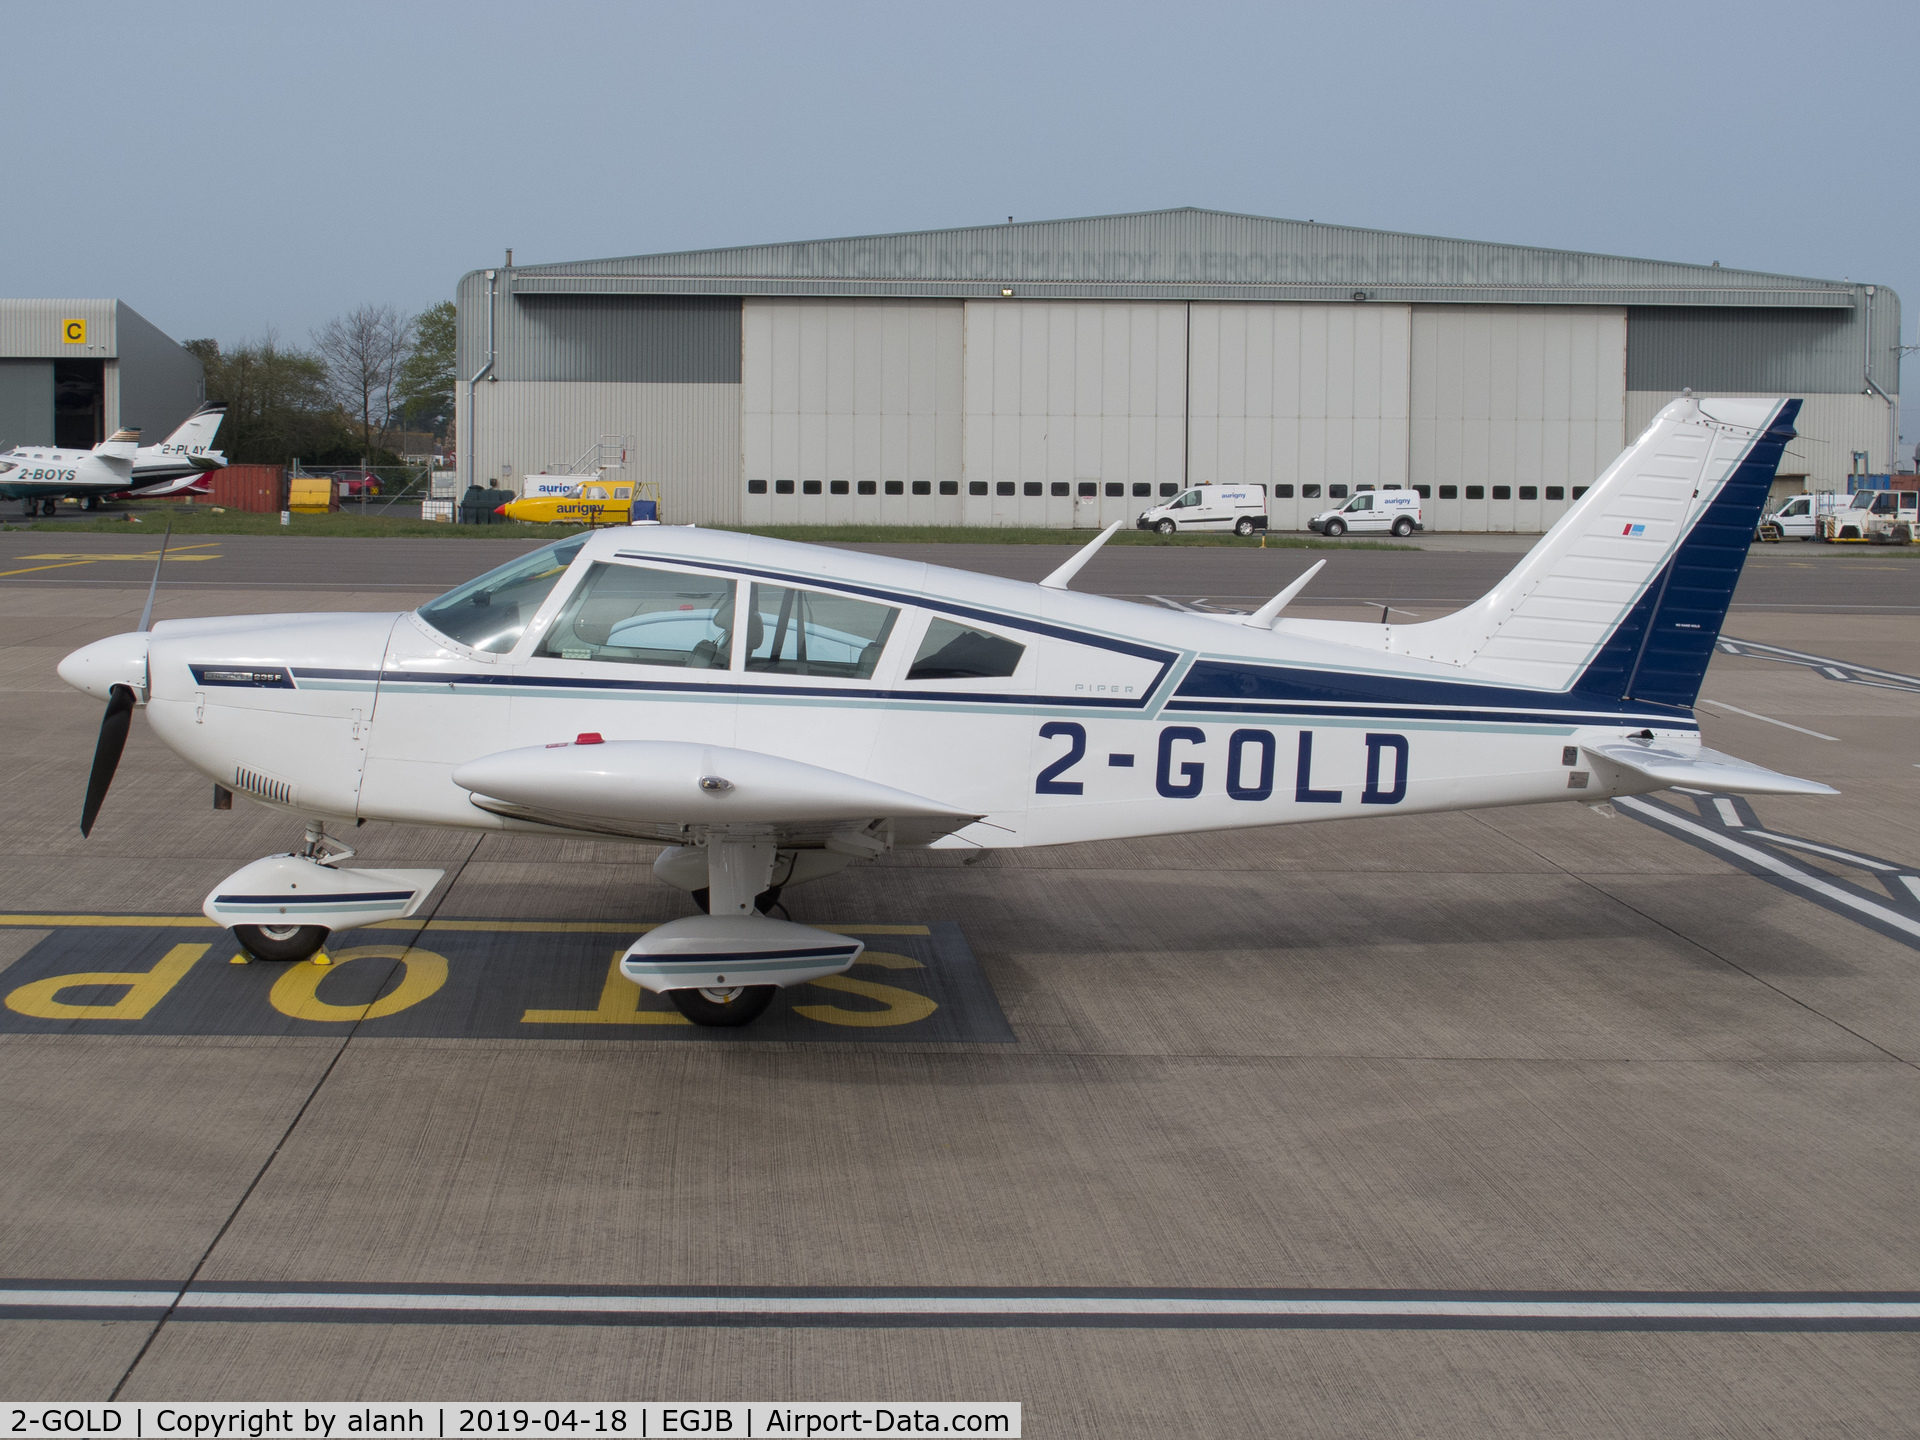 2-GOLD, 1972 Piper PA-28-235 Cherokee Pathfinder C/N 28-7210009, On the west parking, Guernsey